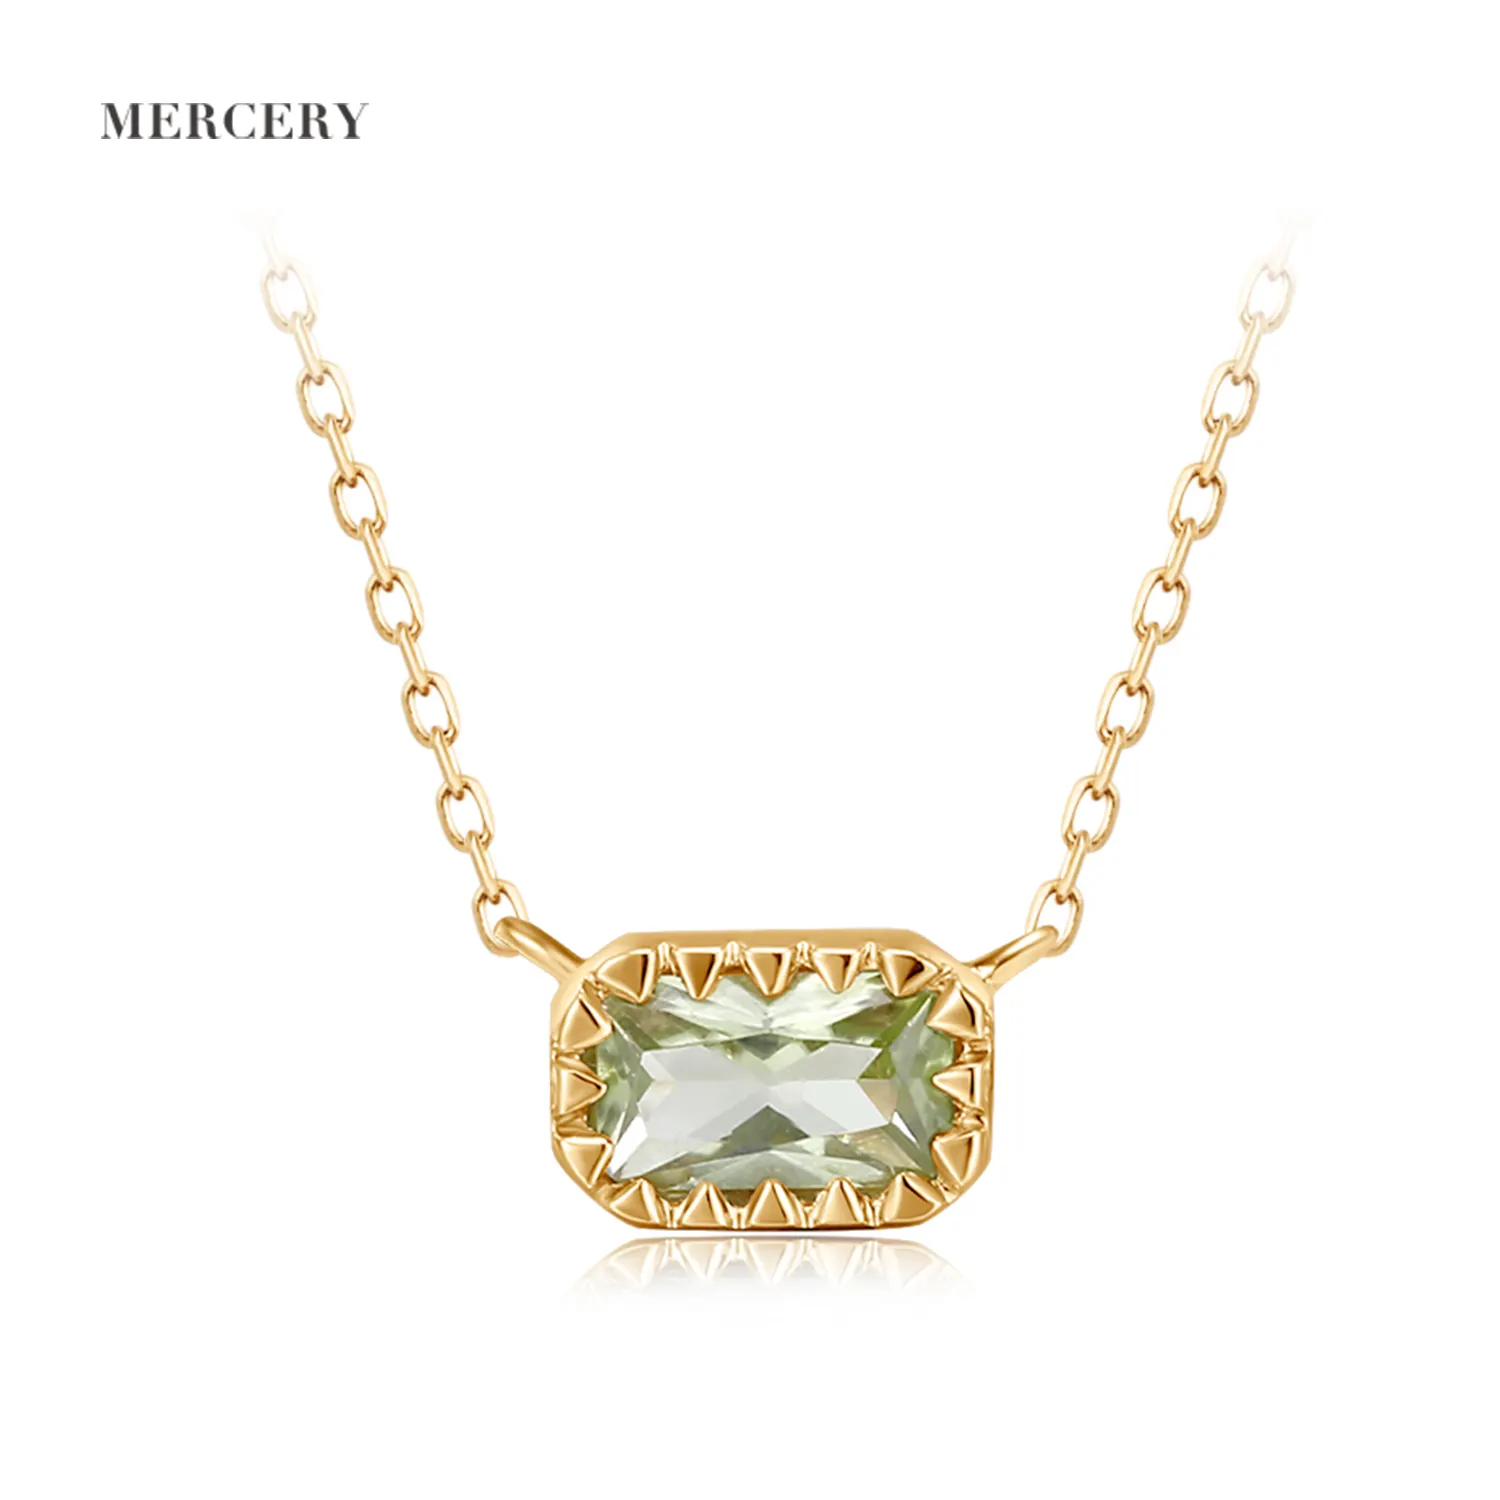 Mercery Fashion Jewelry Necklaces 2022 Trend Jewelry Solid Gold 14K Necklace Olivine Pendant For Womens Necklace Fine Jewelry